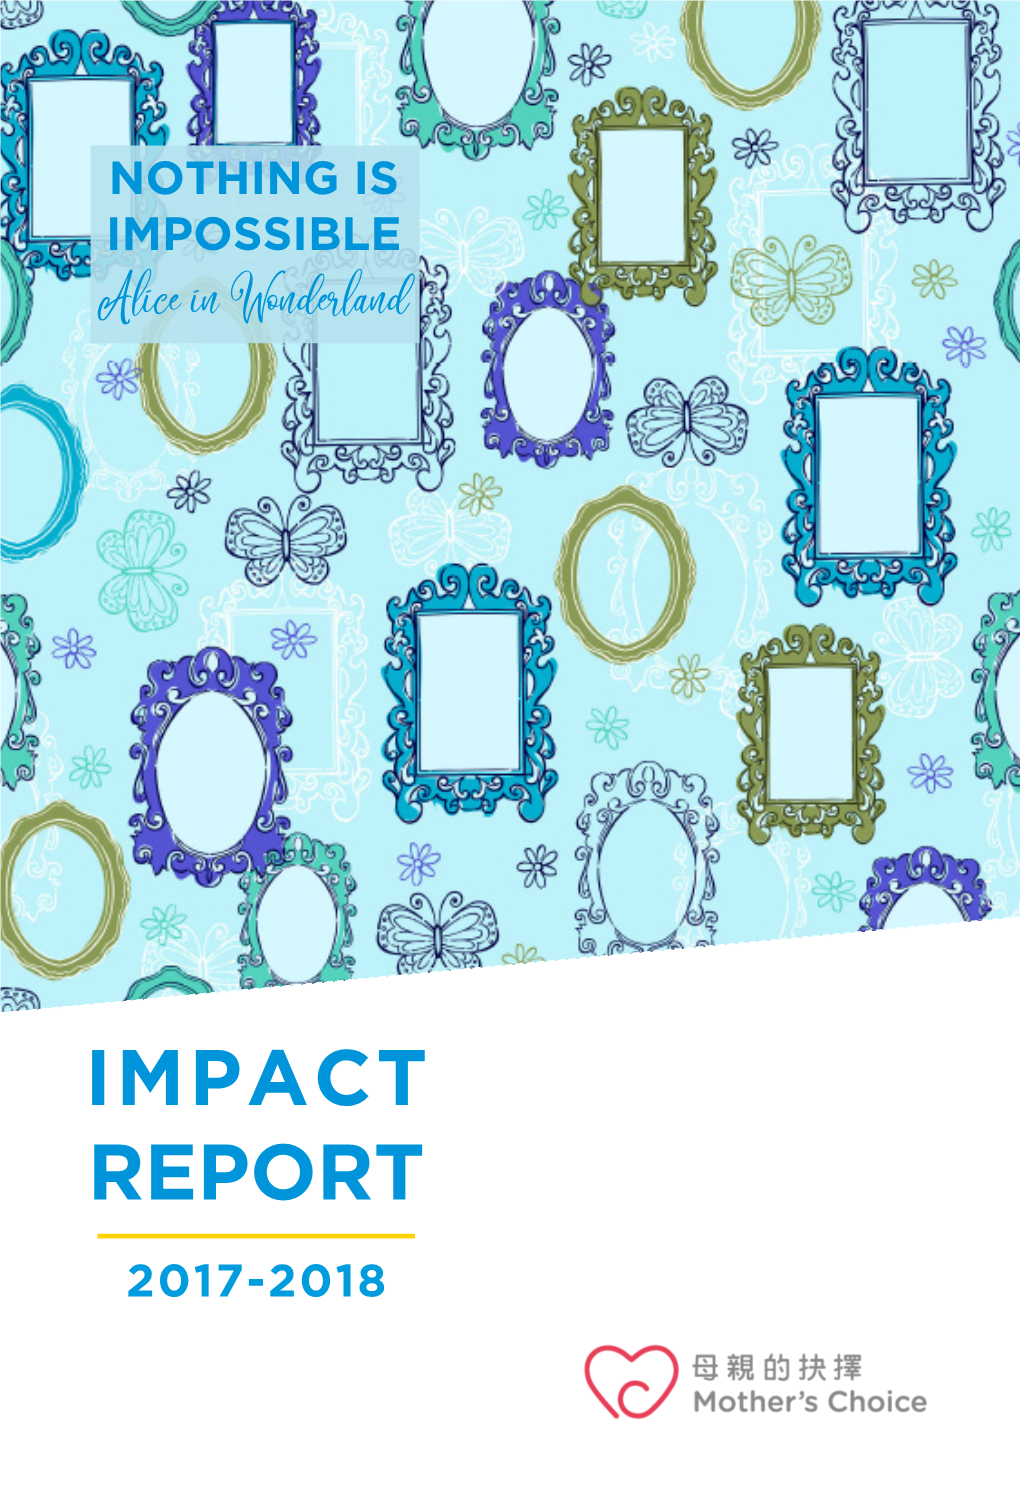 Impact Report 2017-2018 About Mother’S Choice